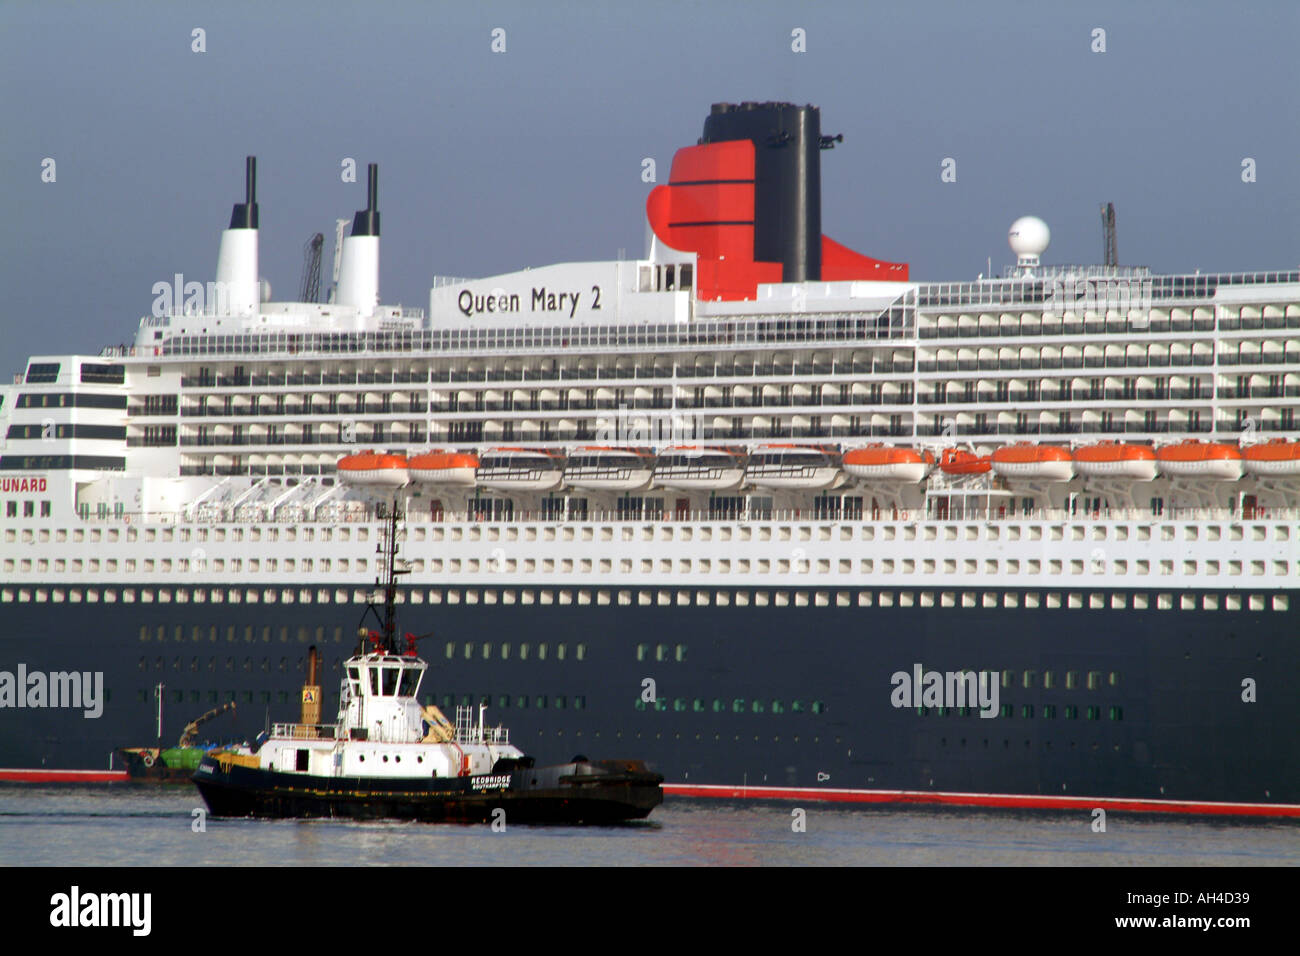 Queen Mary 2 Cunards Flagship Cruise Liner on Southampton Water with tug Redbridge England UK Stock Photo